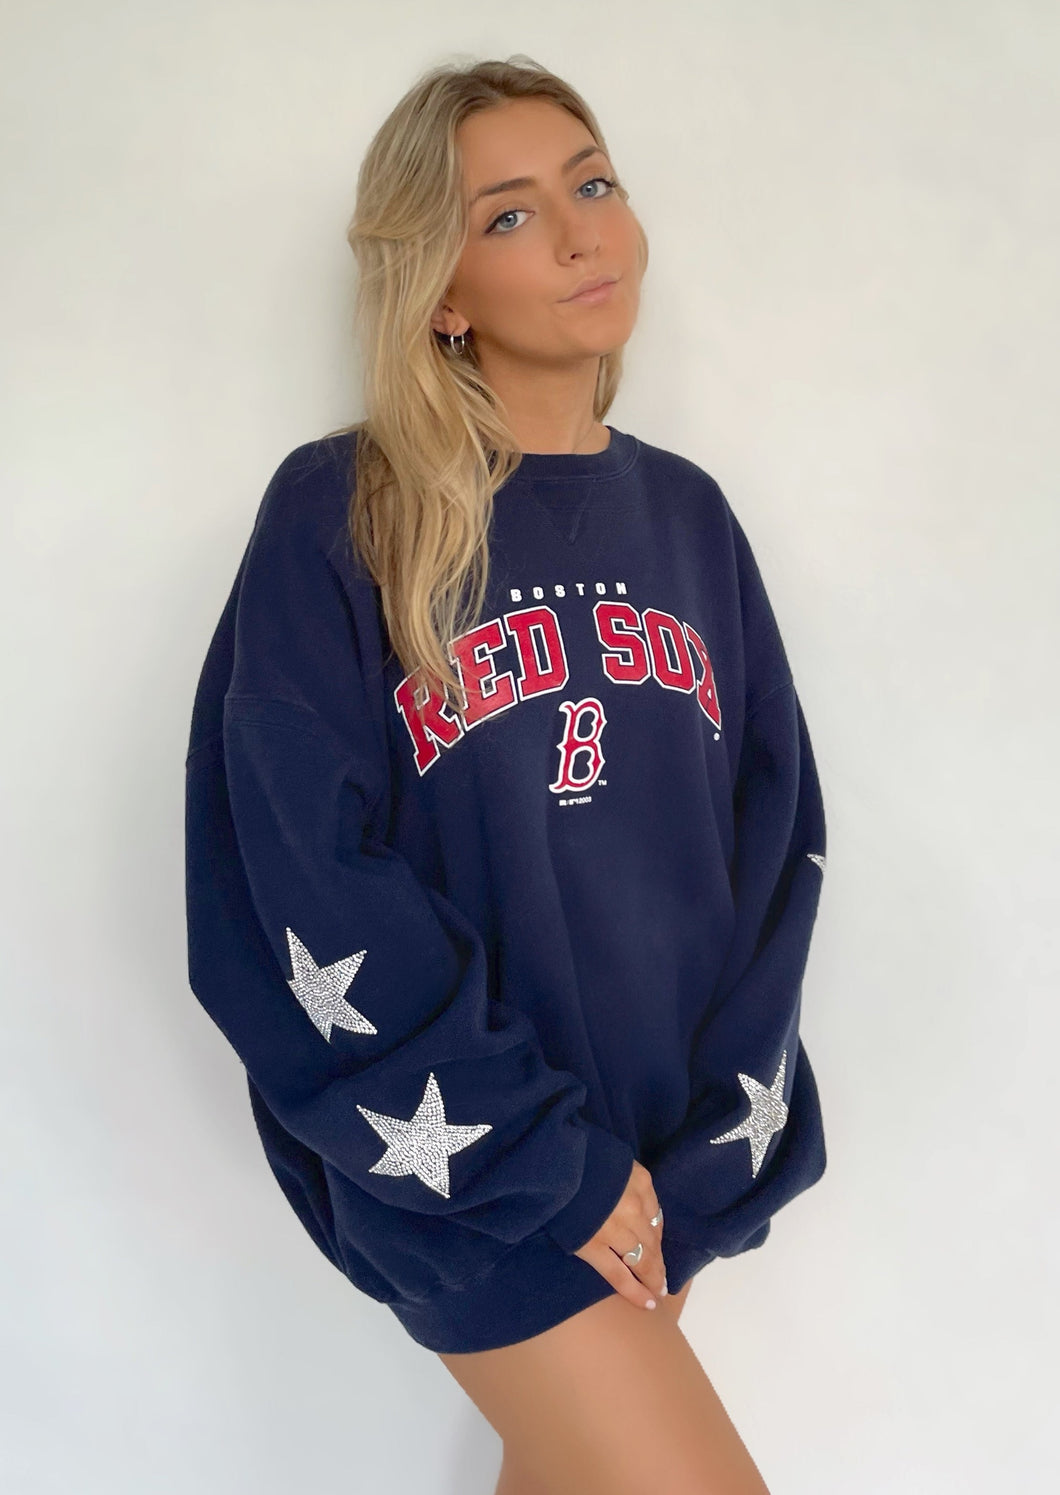 Boston Red Sox, MLB One of a KIND Vintage Sweatshirt with Crystal Star Design